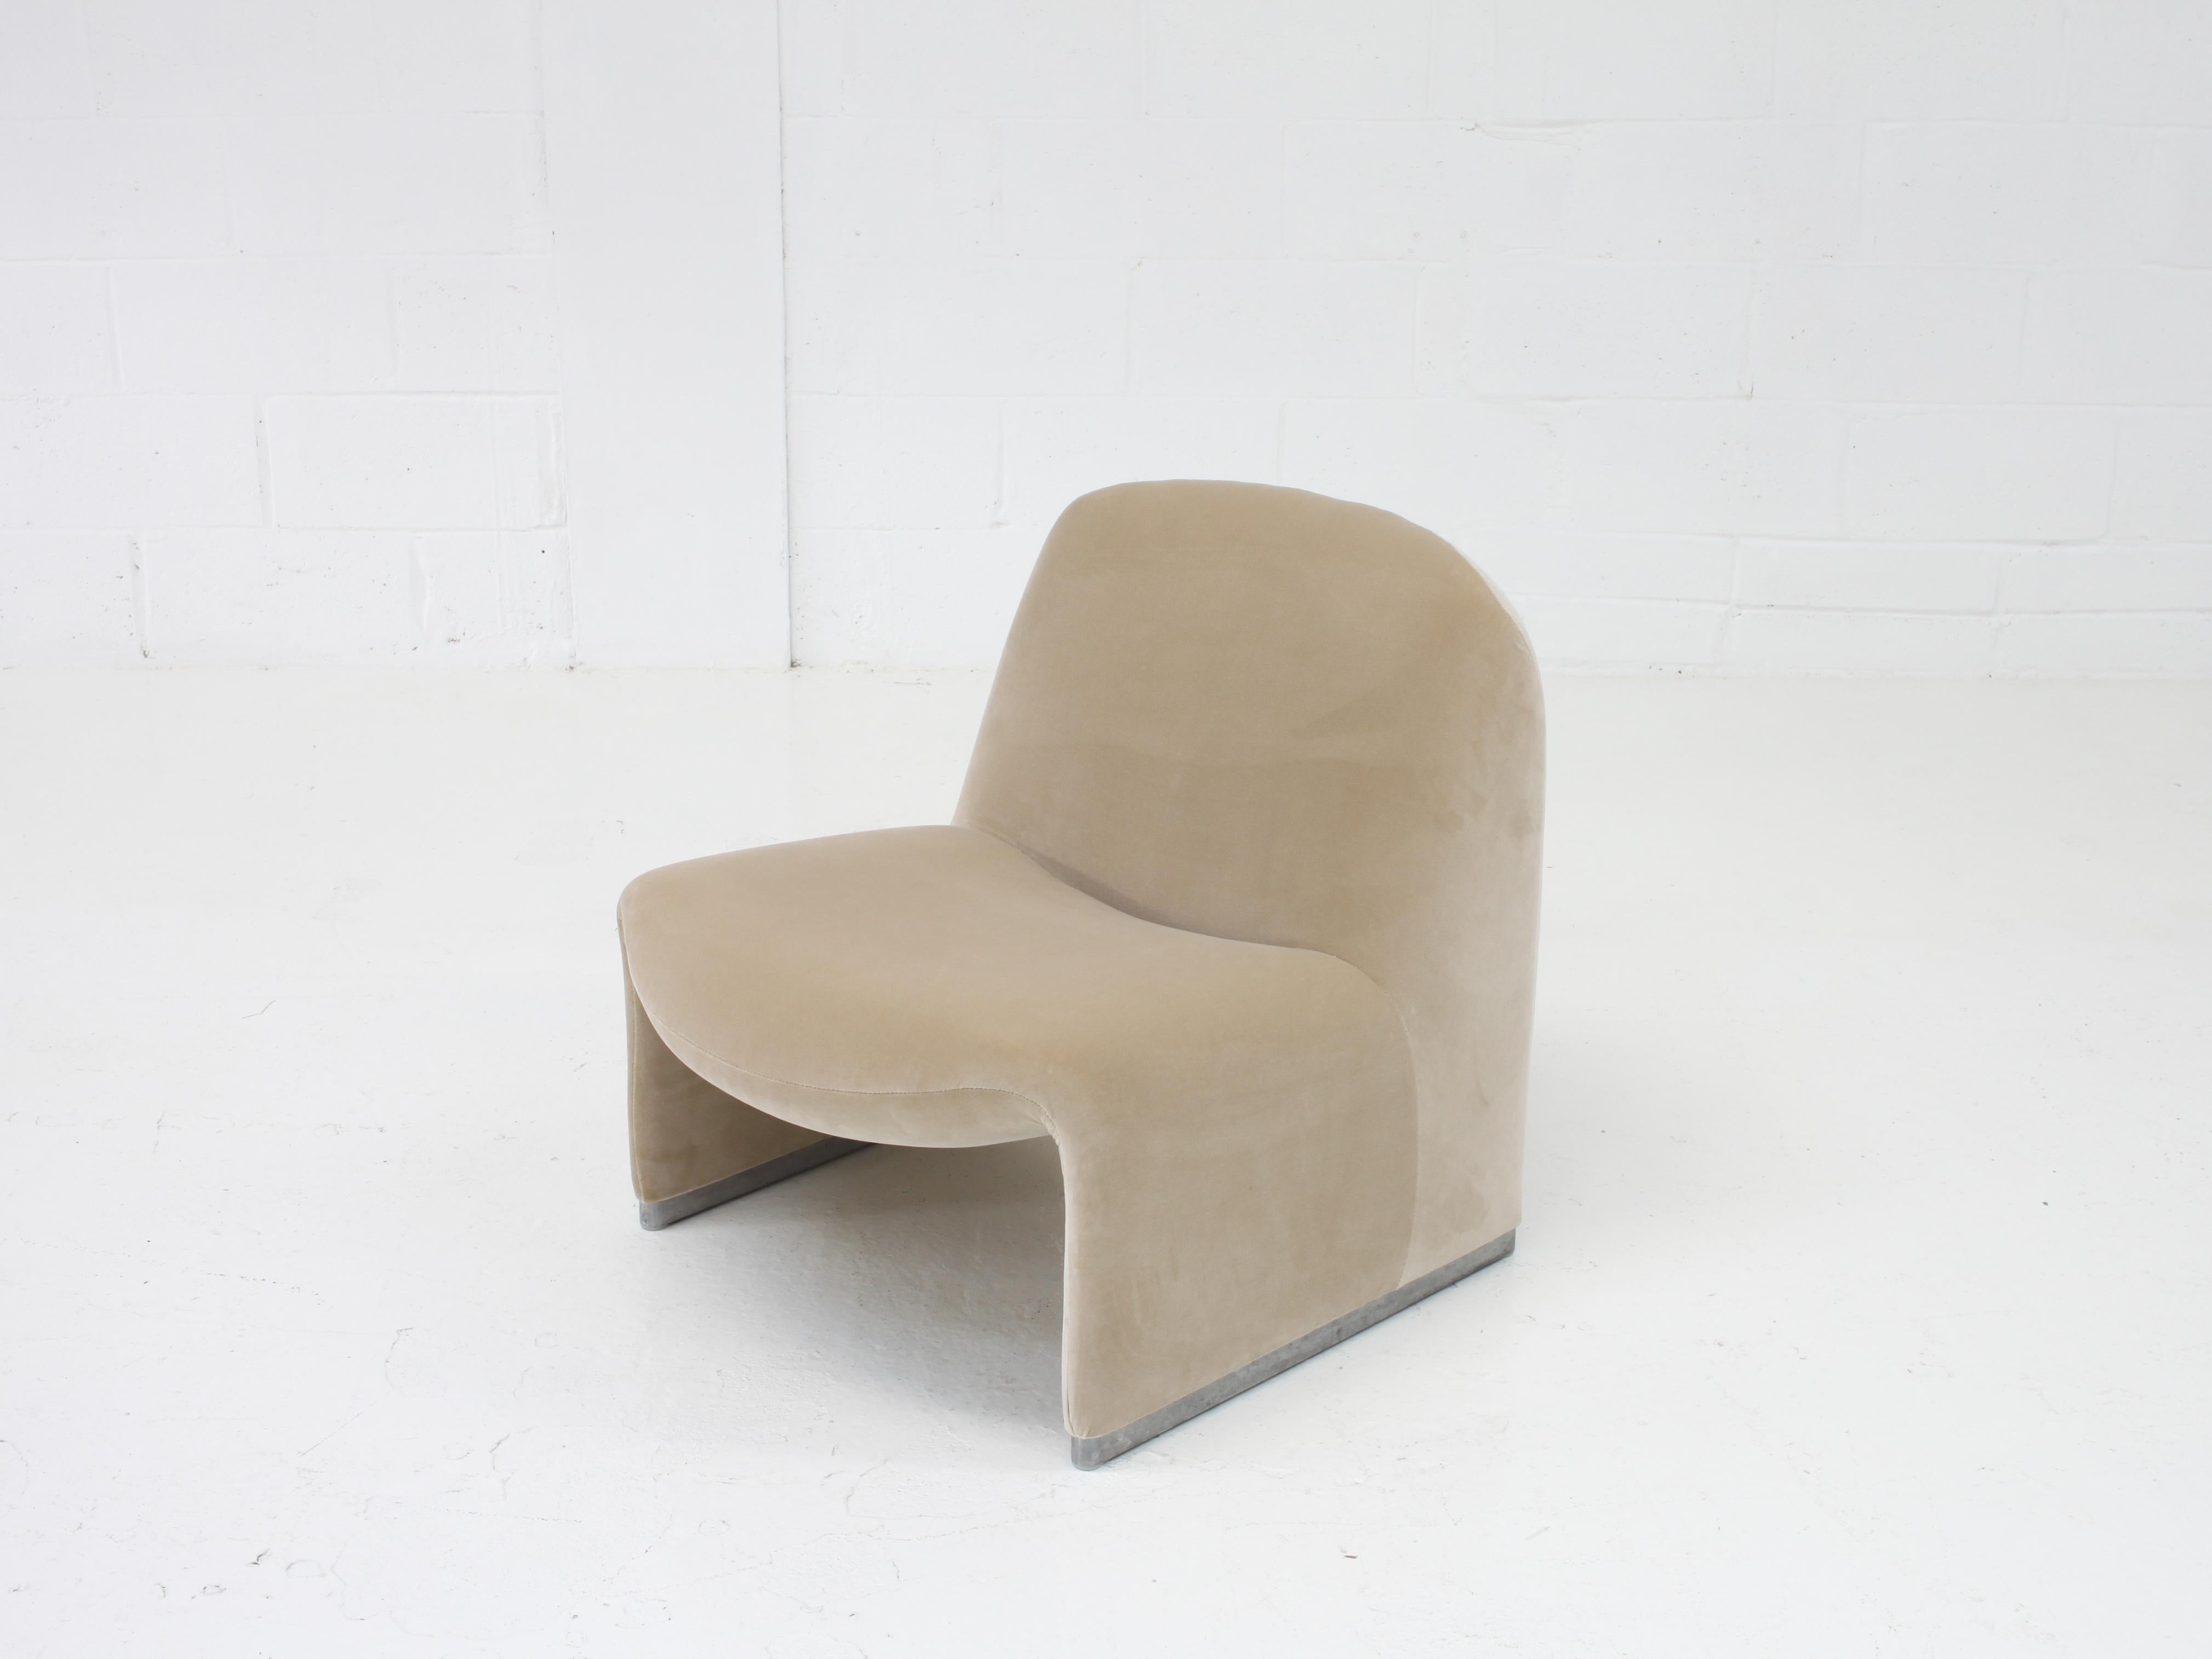 20th Century Pair of Giancarlo Piretti “Alky” Chairs - PREPARED FOR UPHOLSTERY